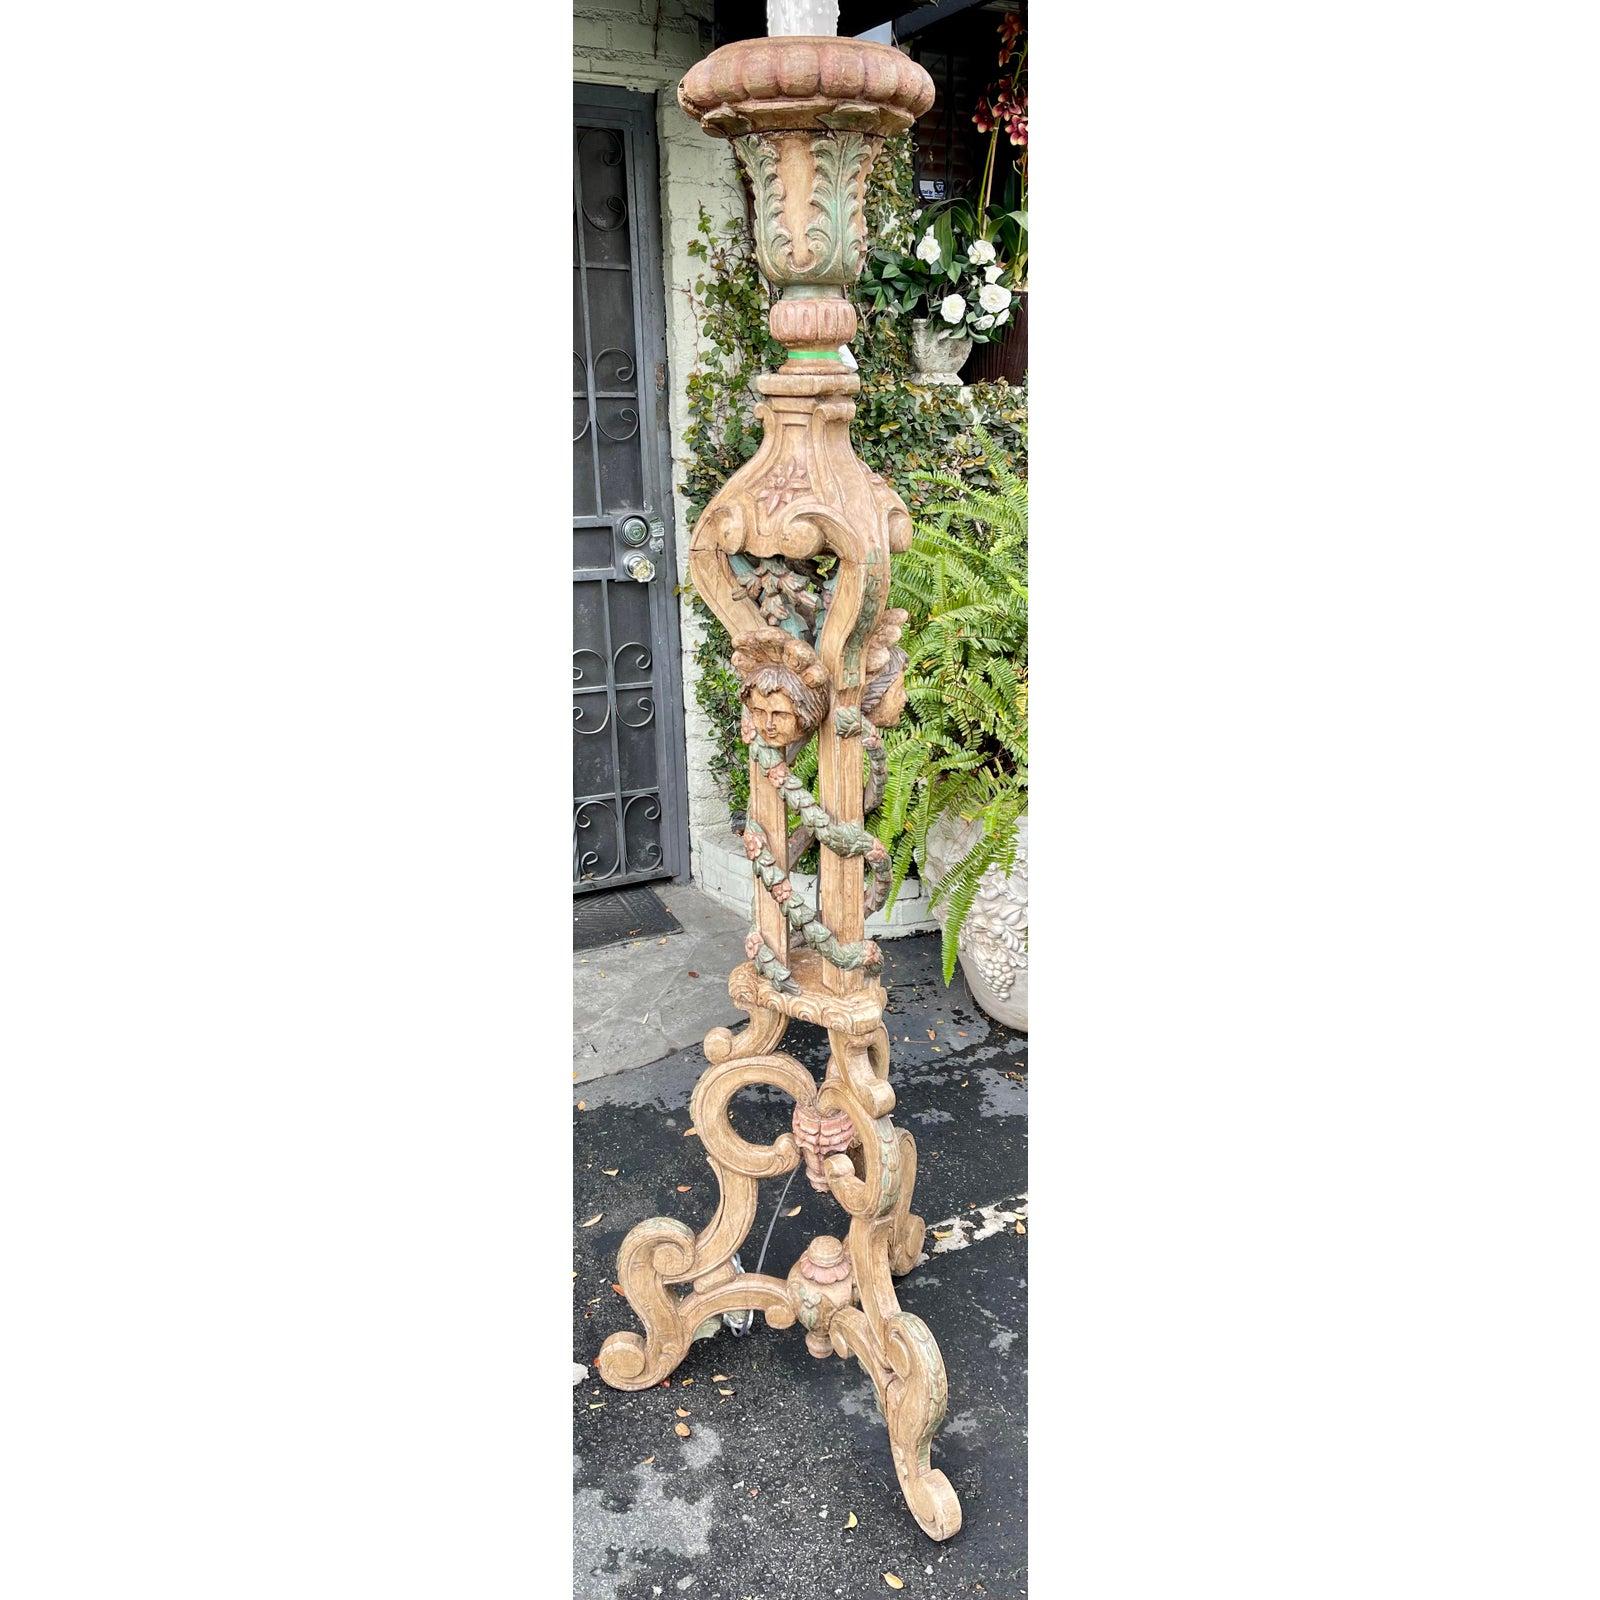 Antique Portuguese Carved Figural Spanish Colonial Floor Lamp.

Additional information:
Materials: Lights, Wood
Color: Beige
Period: 19th Century
Styles: Figurative, Spanish Colonial
Lamp Shade: Not Included
Item Type: Vintage, Antique or